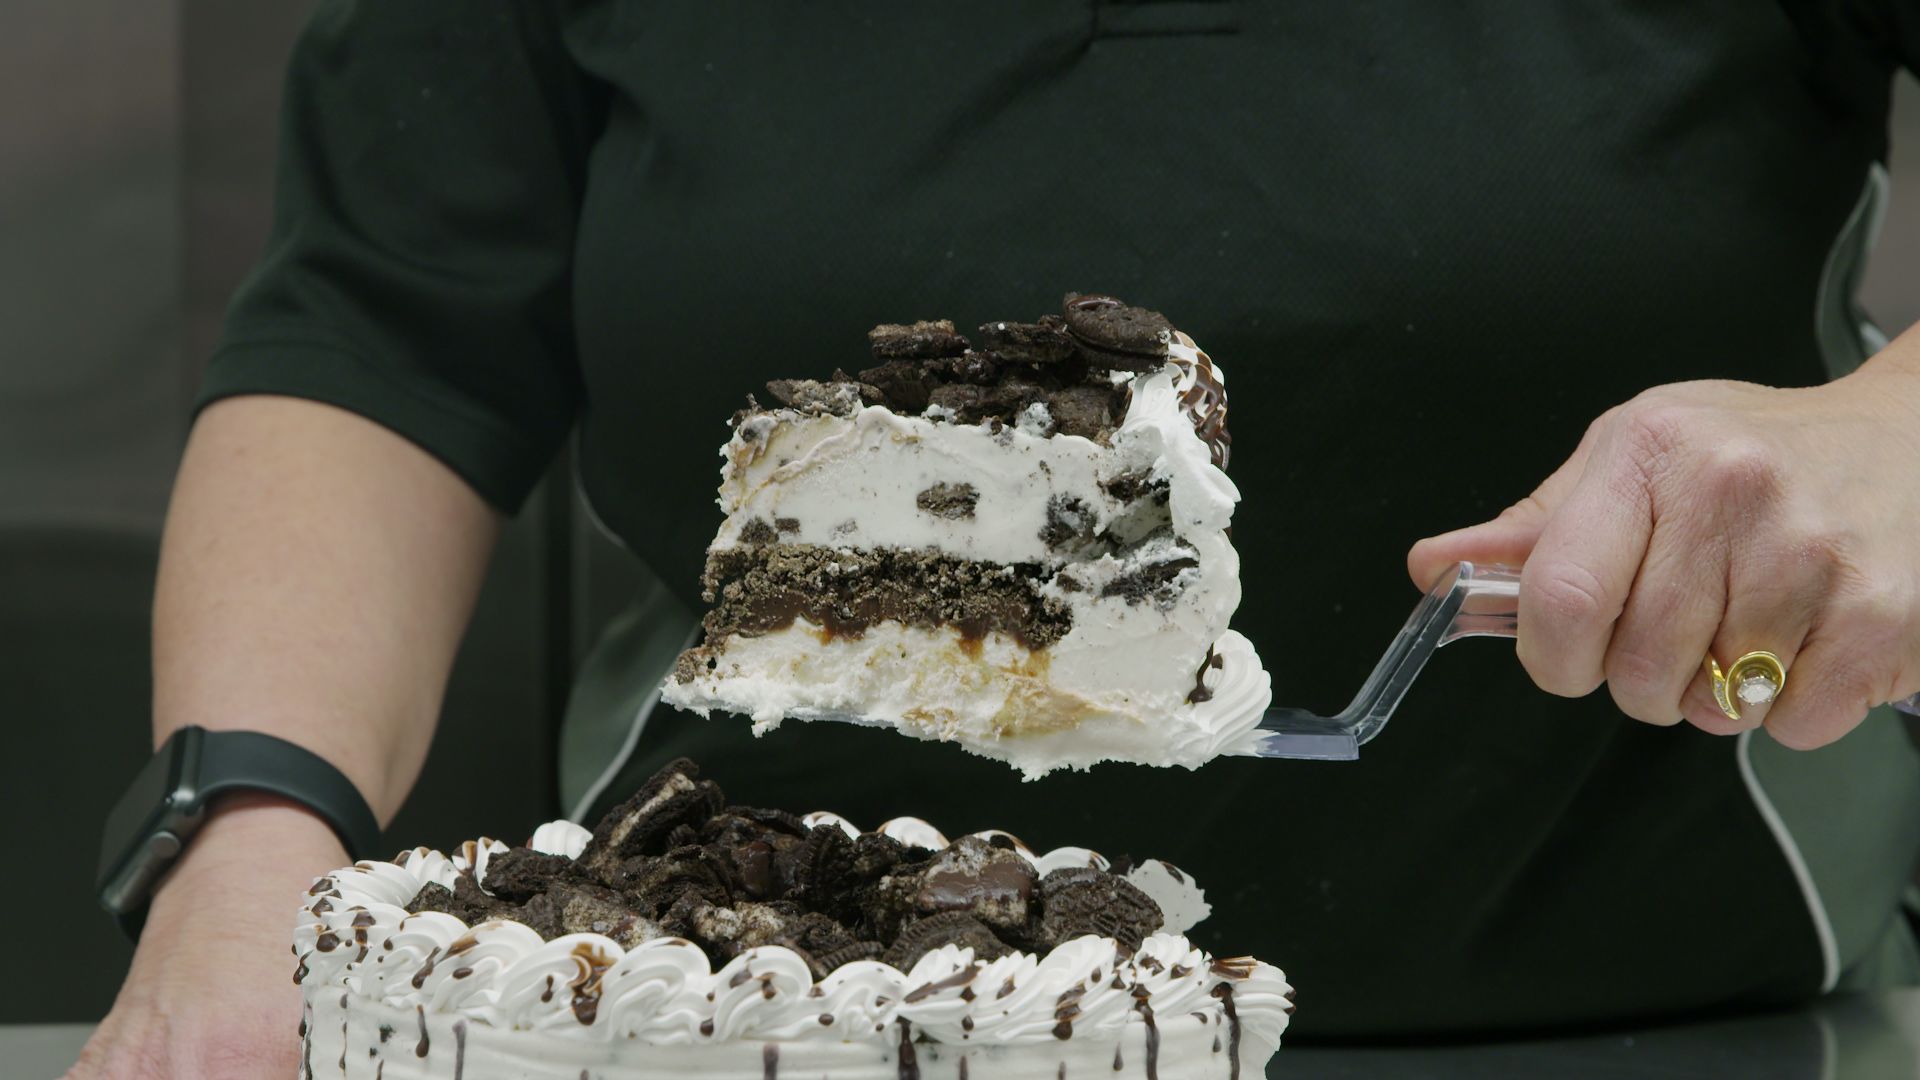 How Does Dairy Queen Make Ice Cream Cake? | LEAFtv